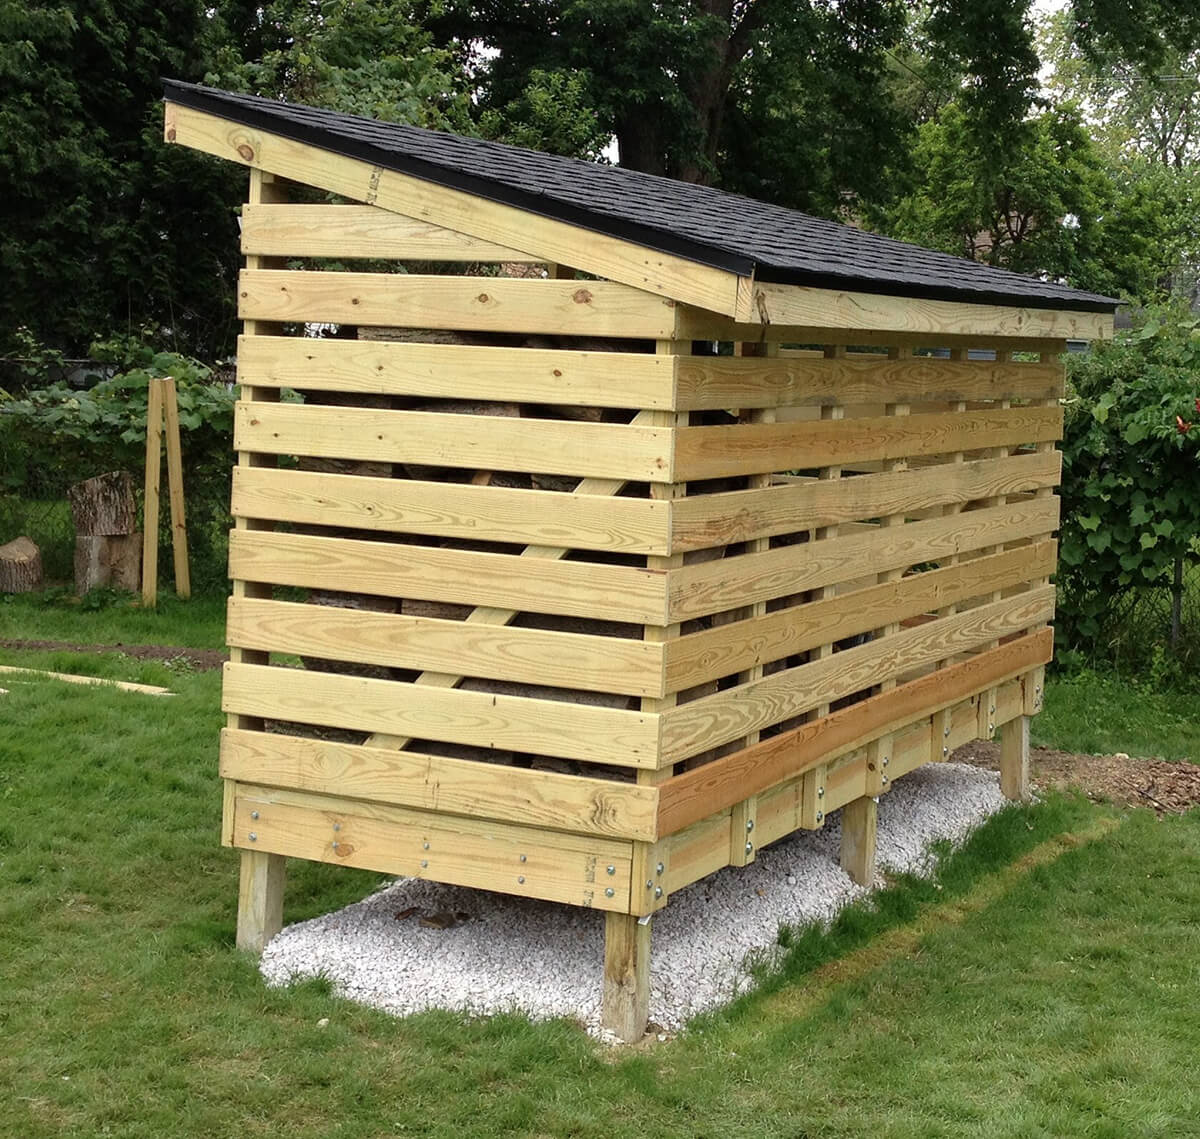 A Raised Storage Space in the Yard